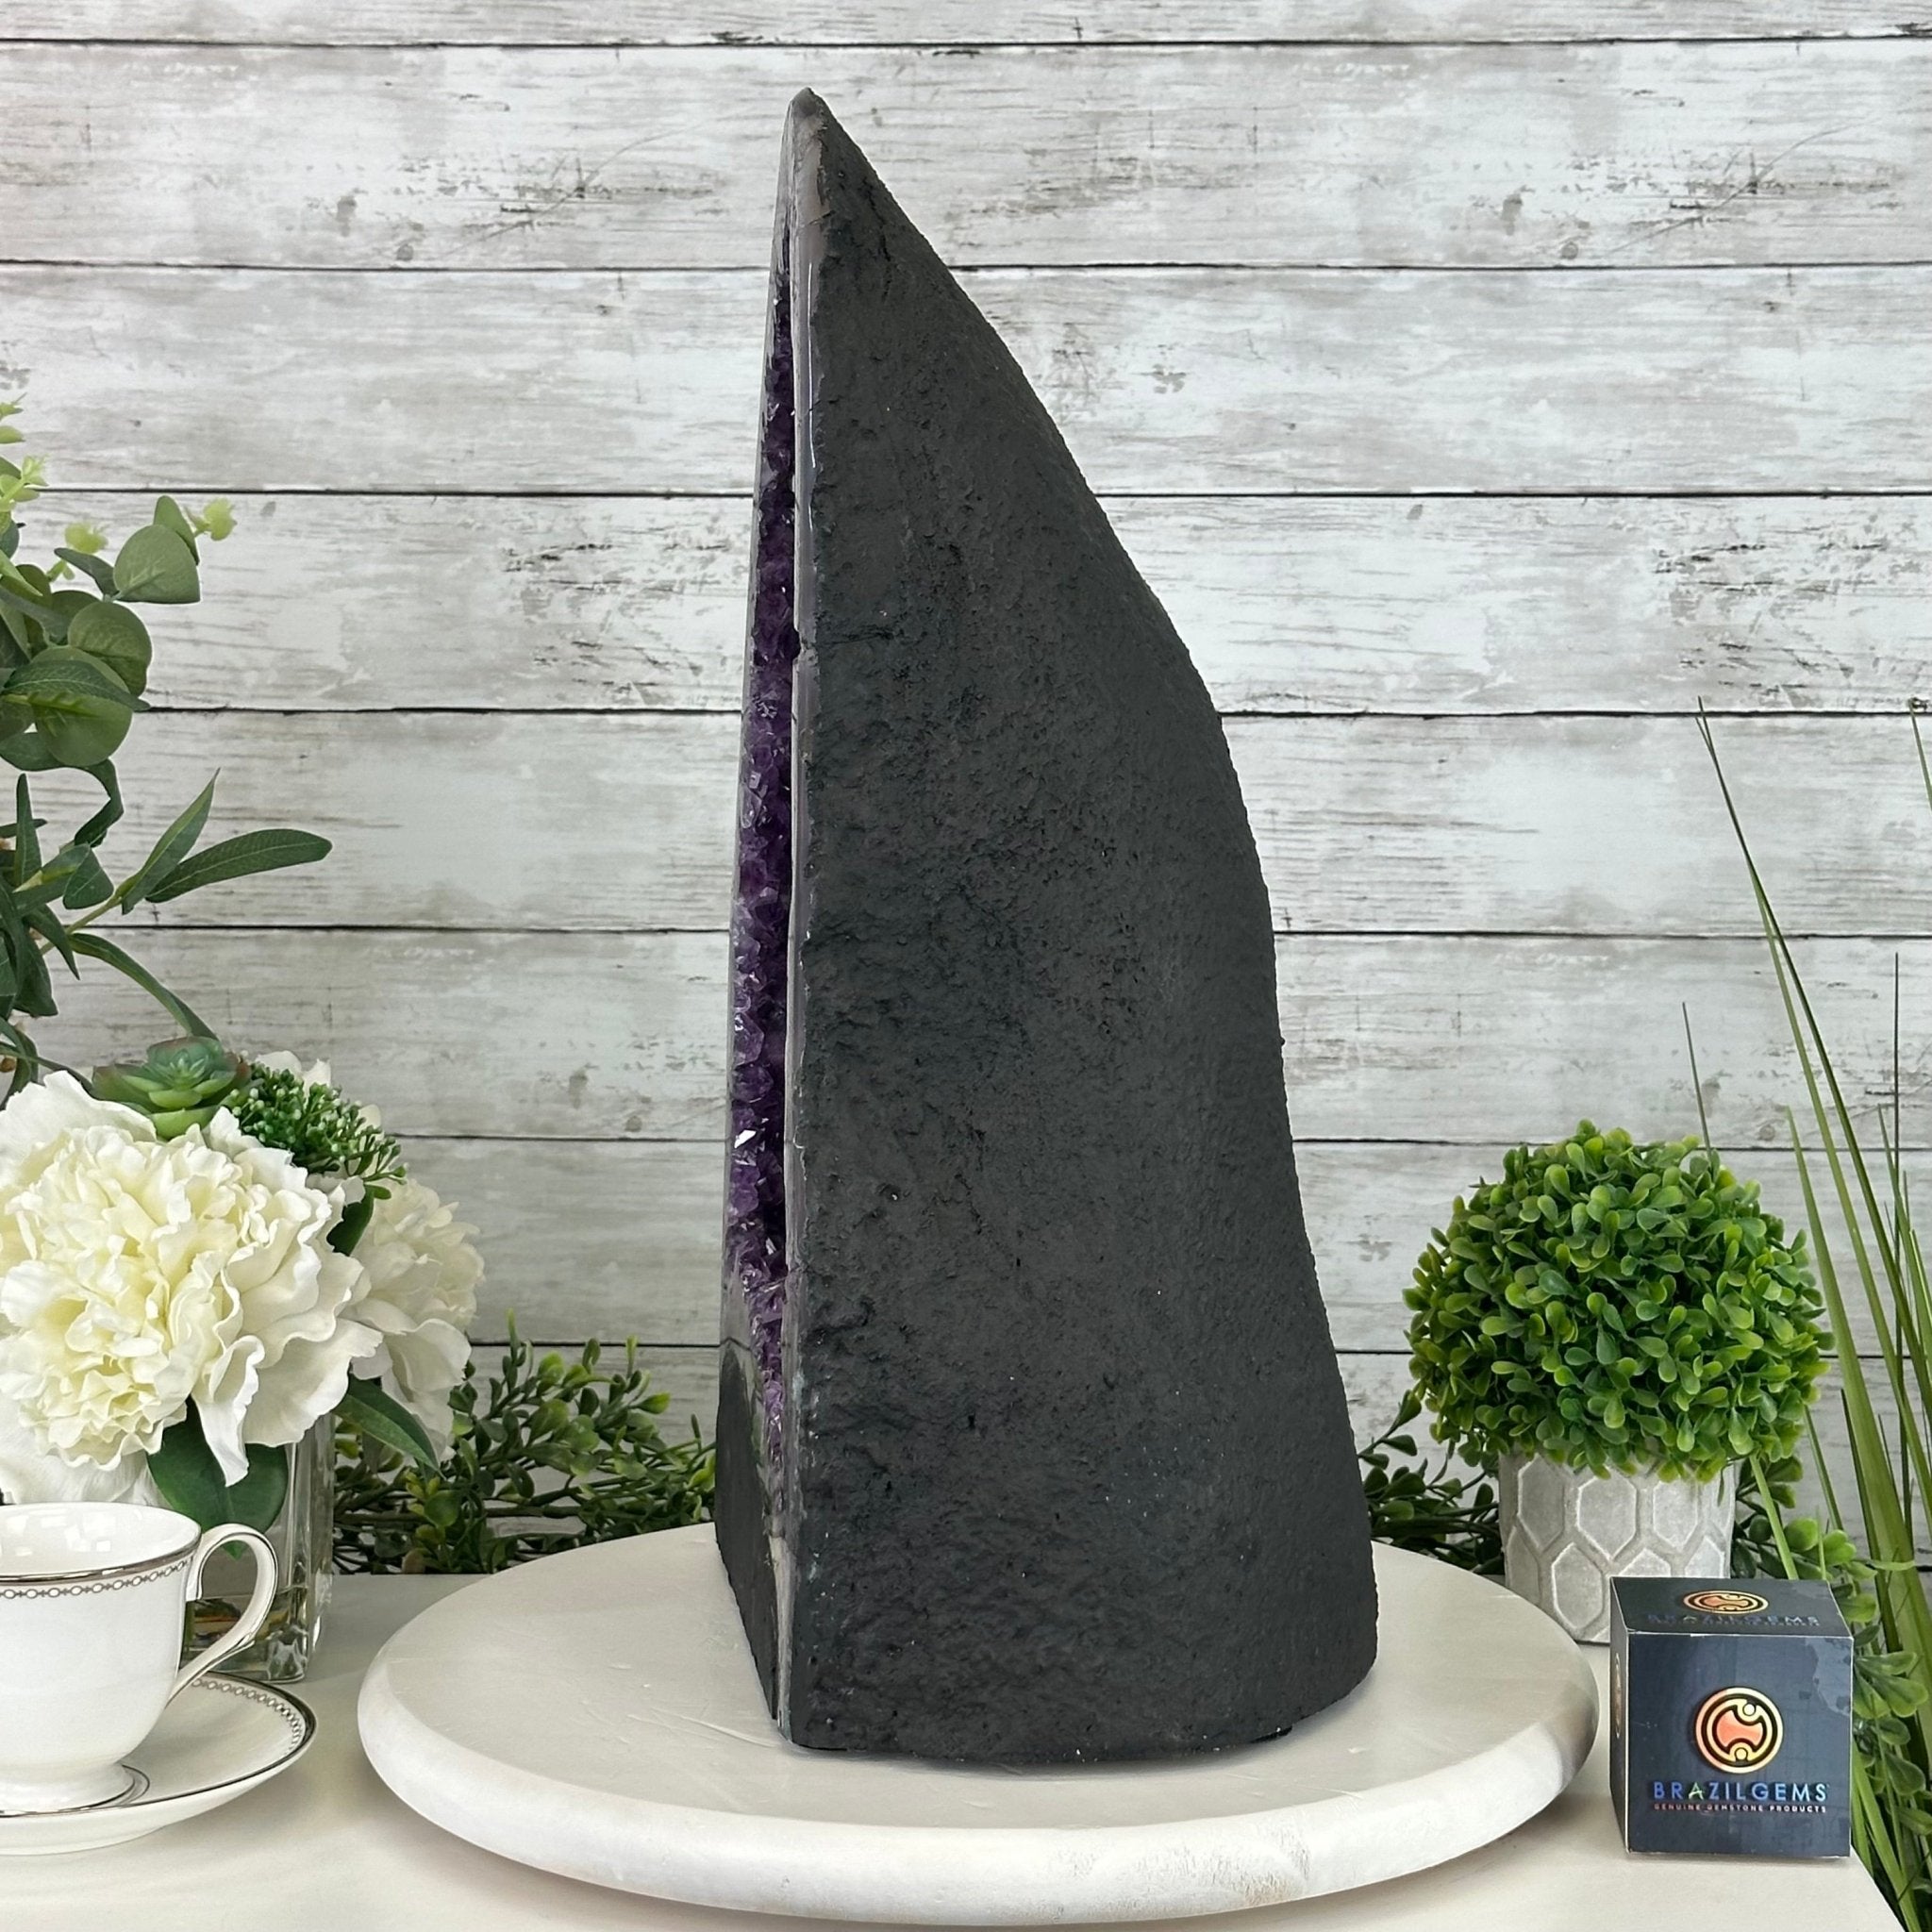 Super Quality Brazilian Amethyst Cathedral, 44 lbs & 18.6" Tall #5601-1311 - Brazil GemsBrazil GemsSuper Quality Brazilian Amethyst Cathedral, 44 lbs & 18.6" Tall #5601-1311Cathedrals5601-1311